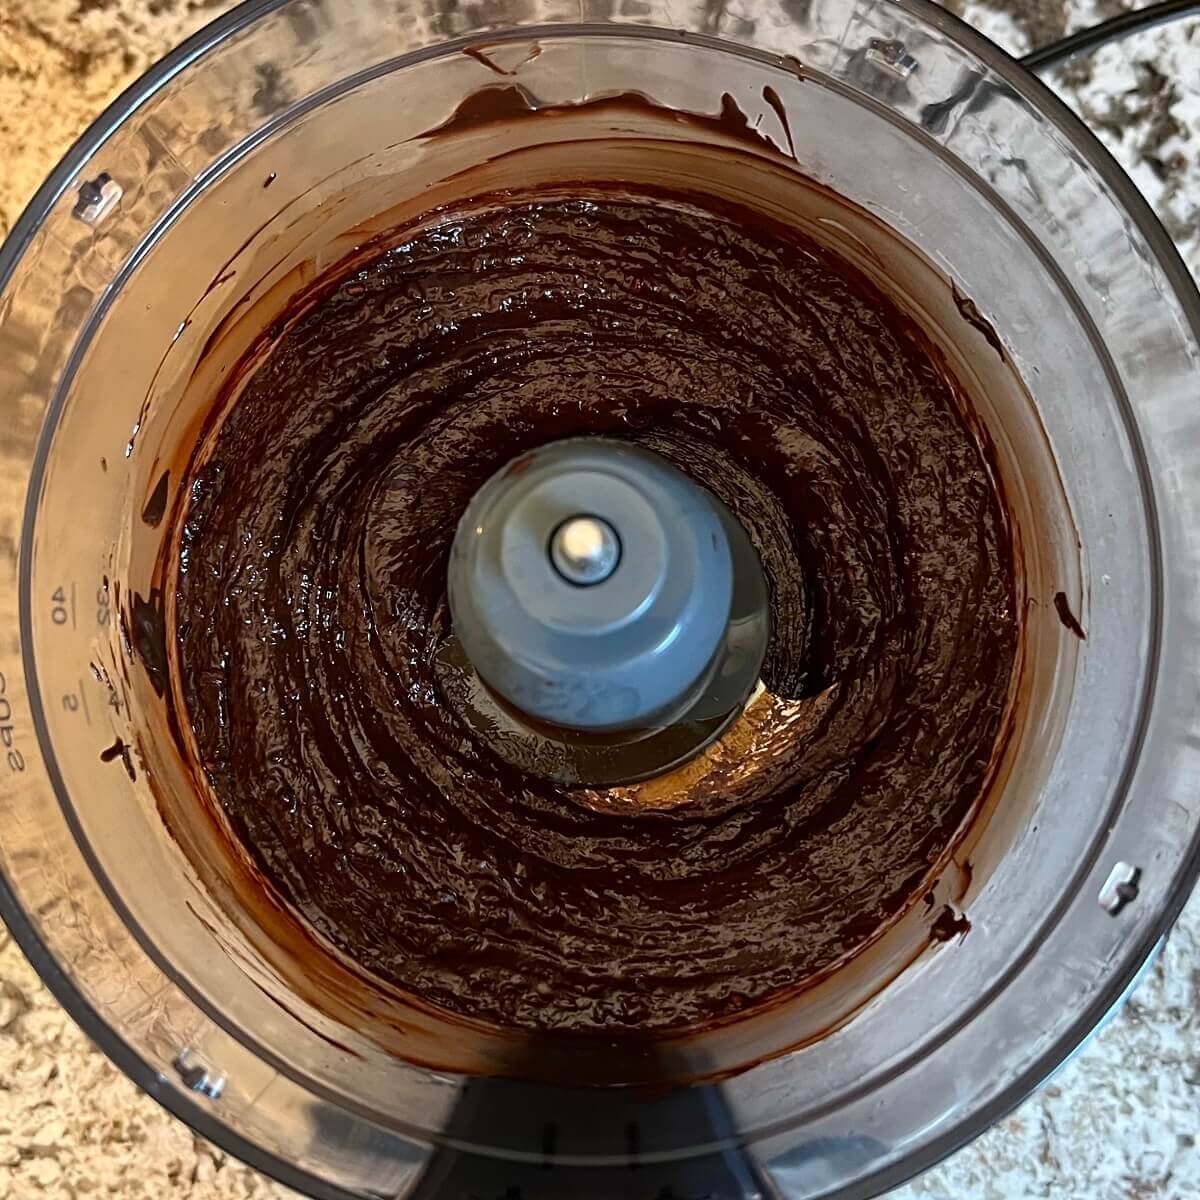 A blended mixture of melted chocolate and raspberries in a food processor.